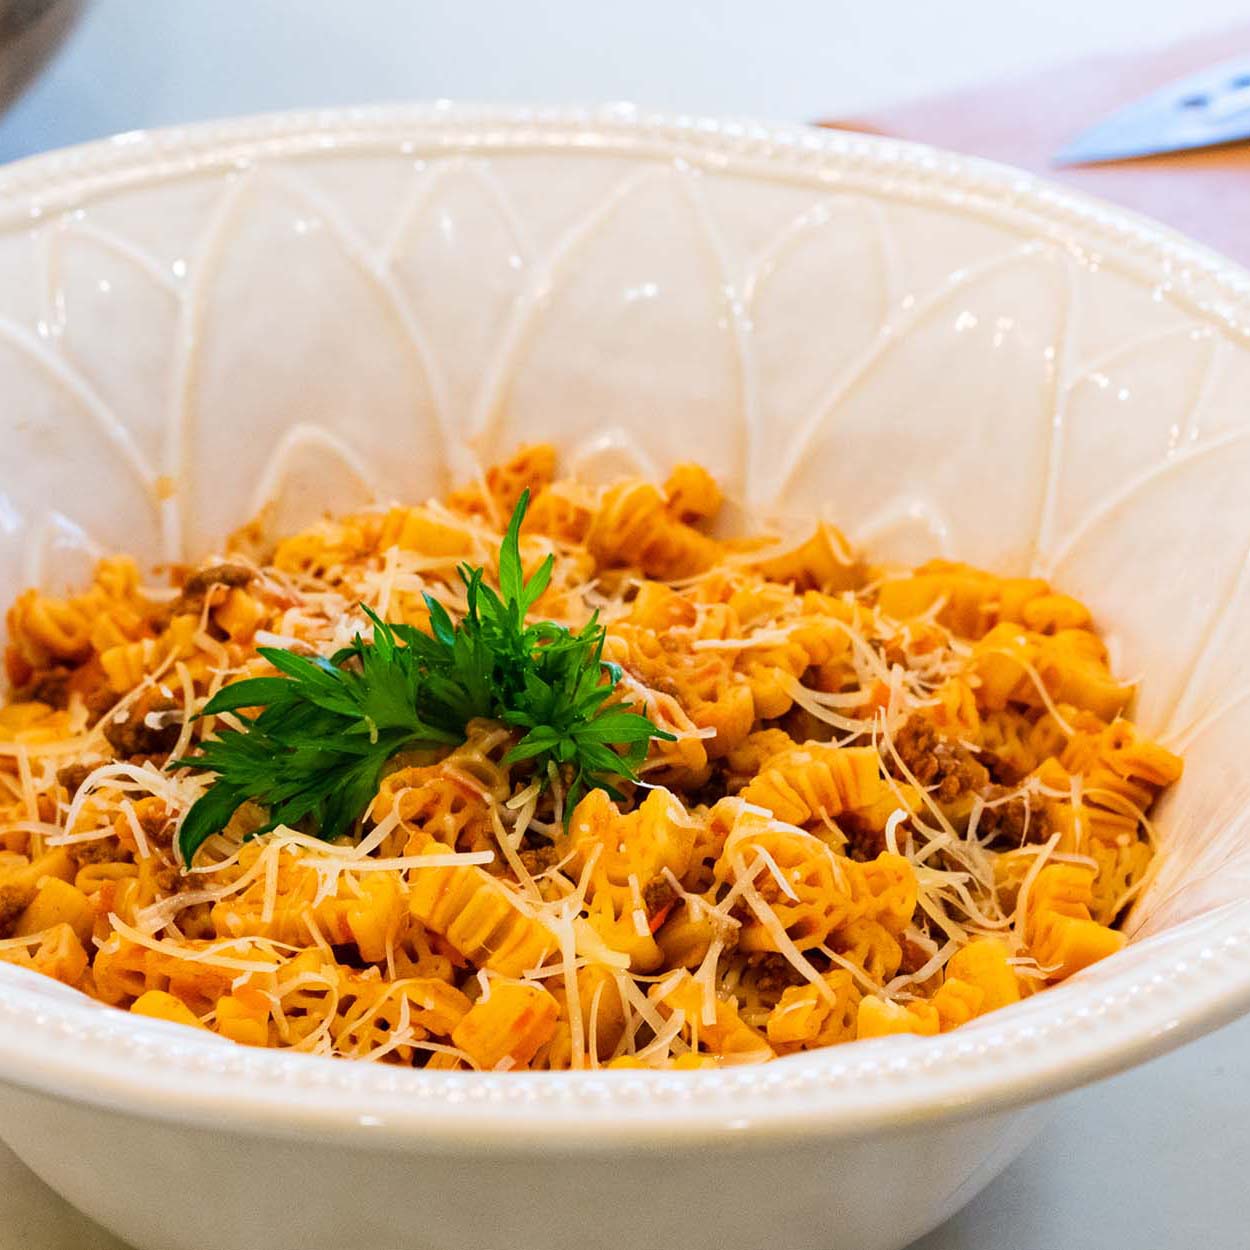 Close up of a white bowl filled with crawfish shaped pasta in a light red sauce, garnished with cheese and fresh herbs.